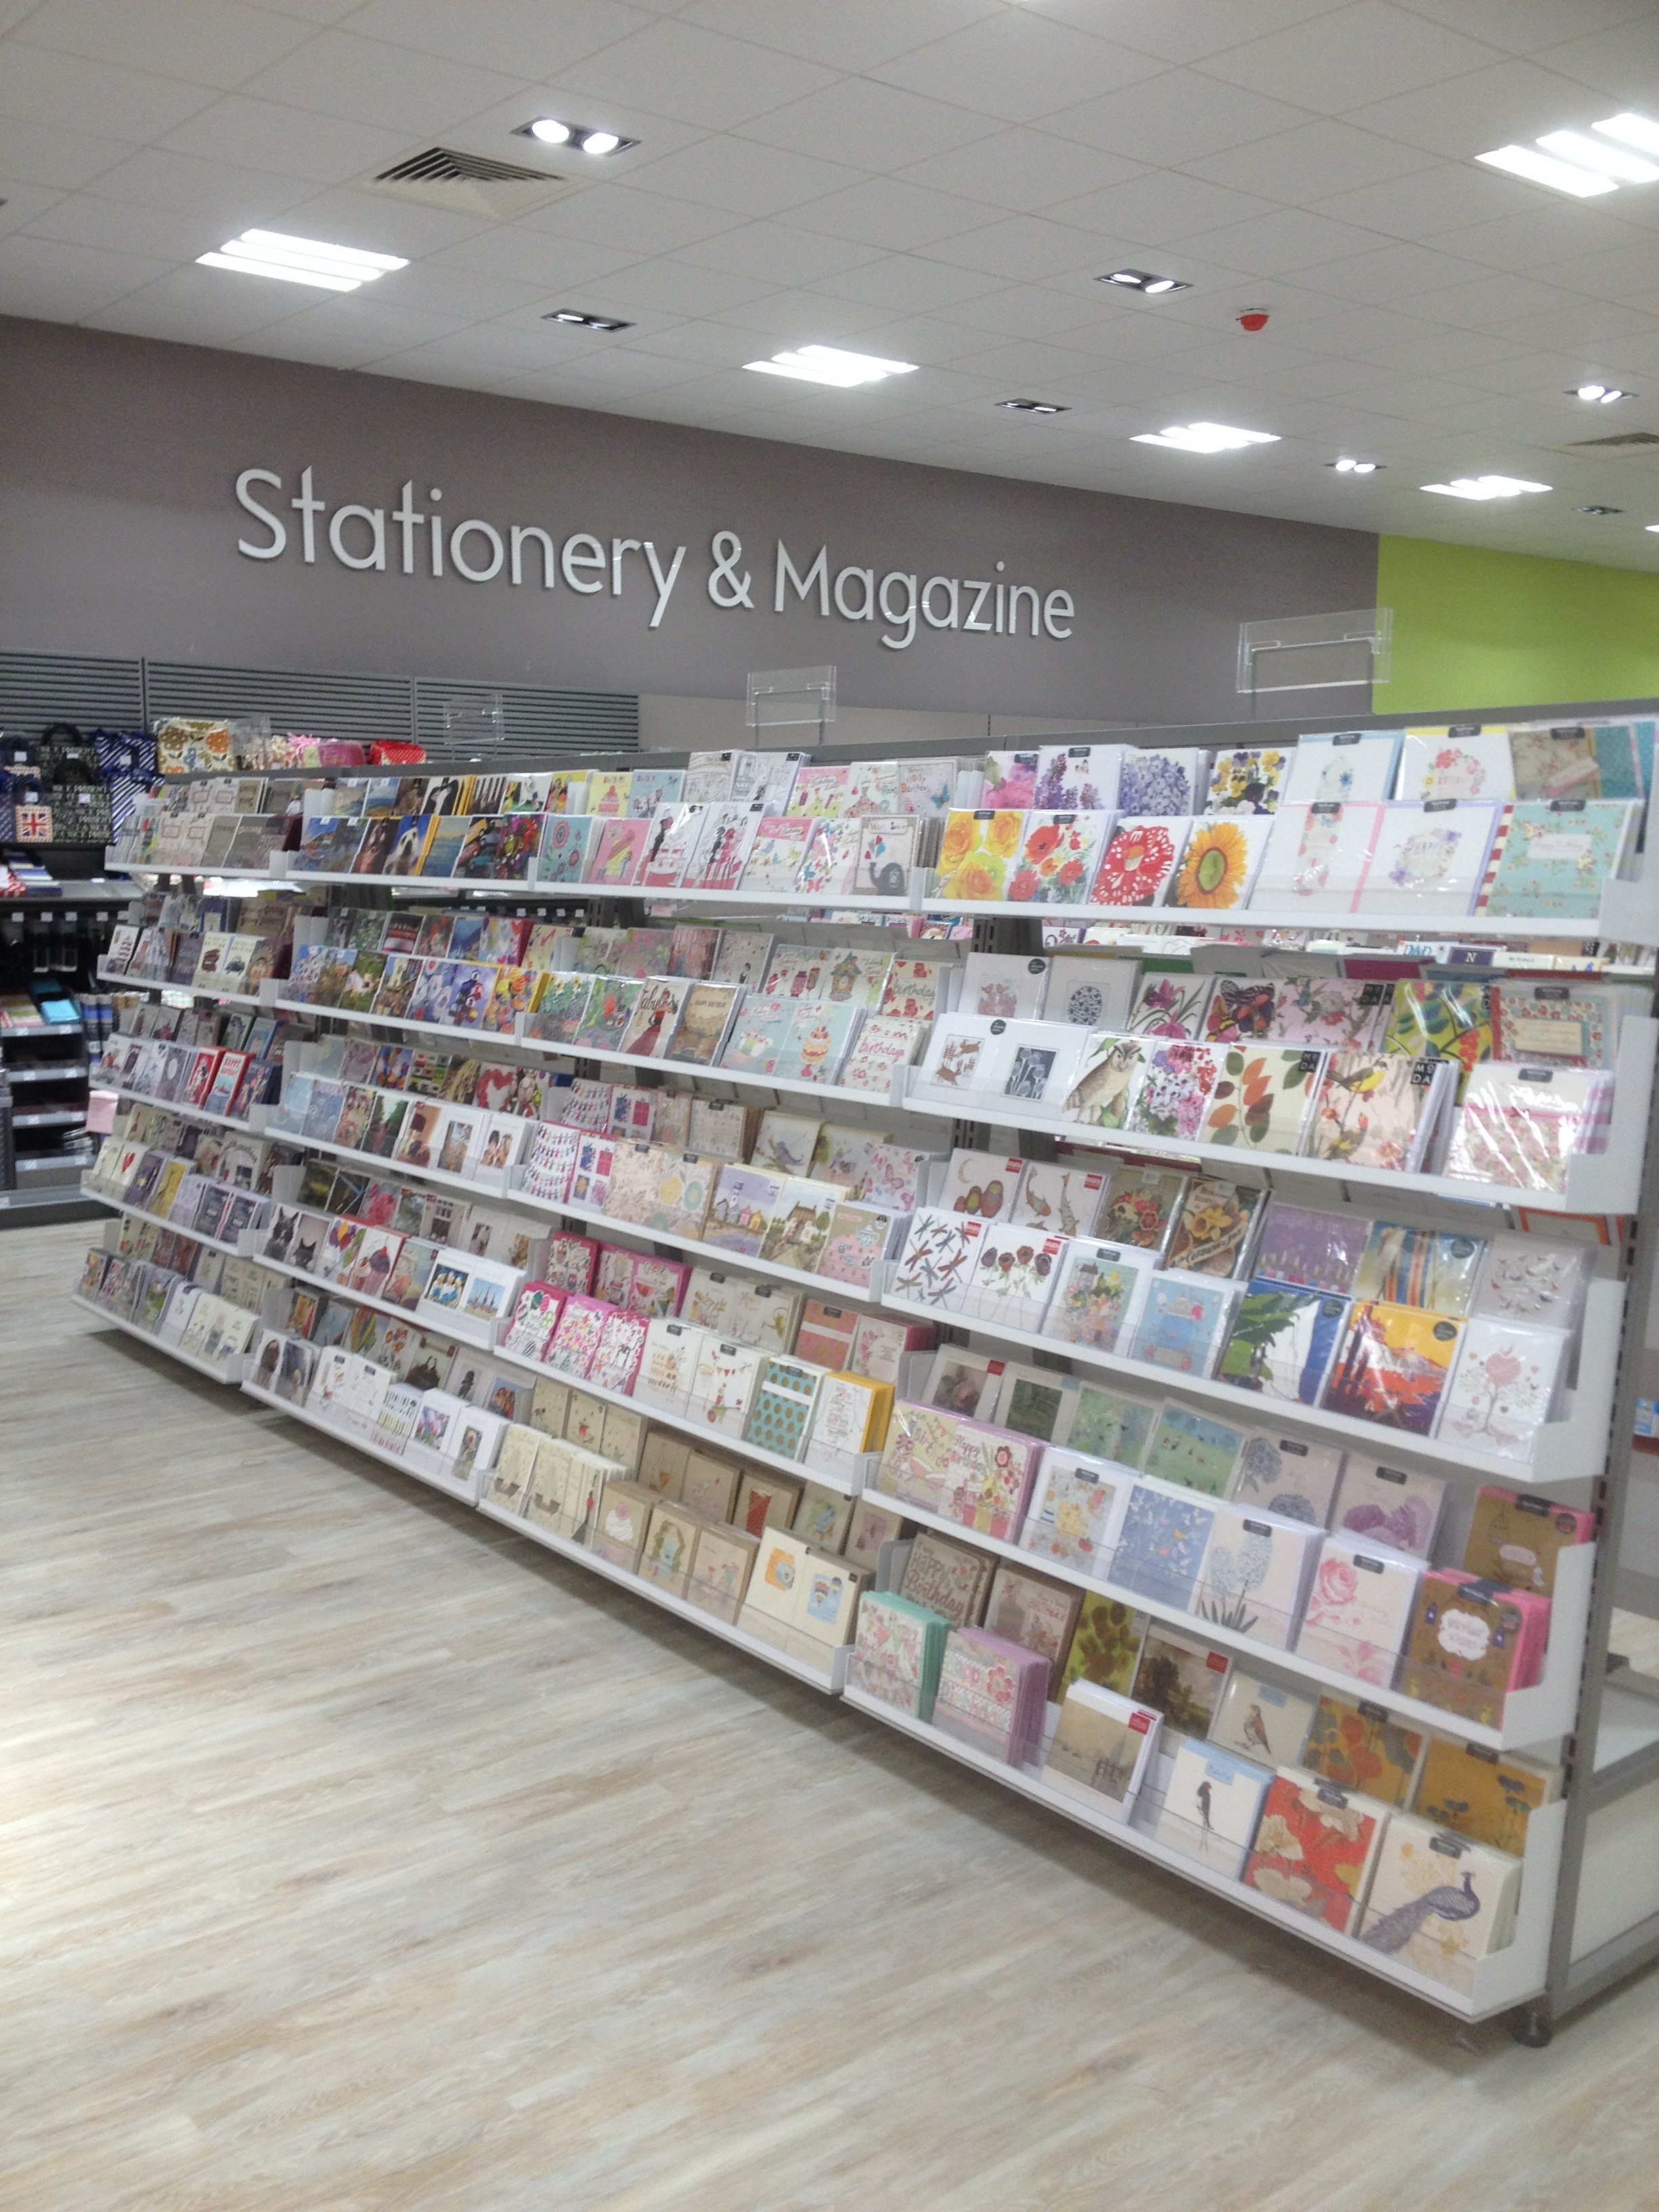 Above: Waitrose is looking to refresh its greeting card offer instore.